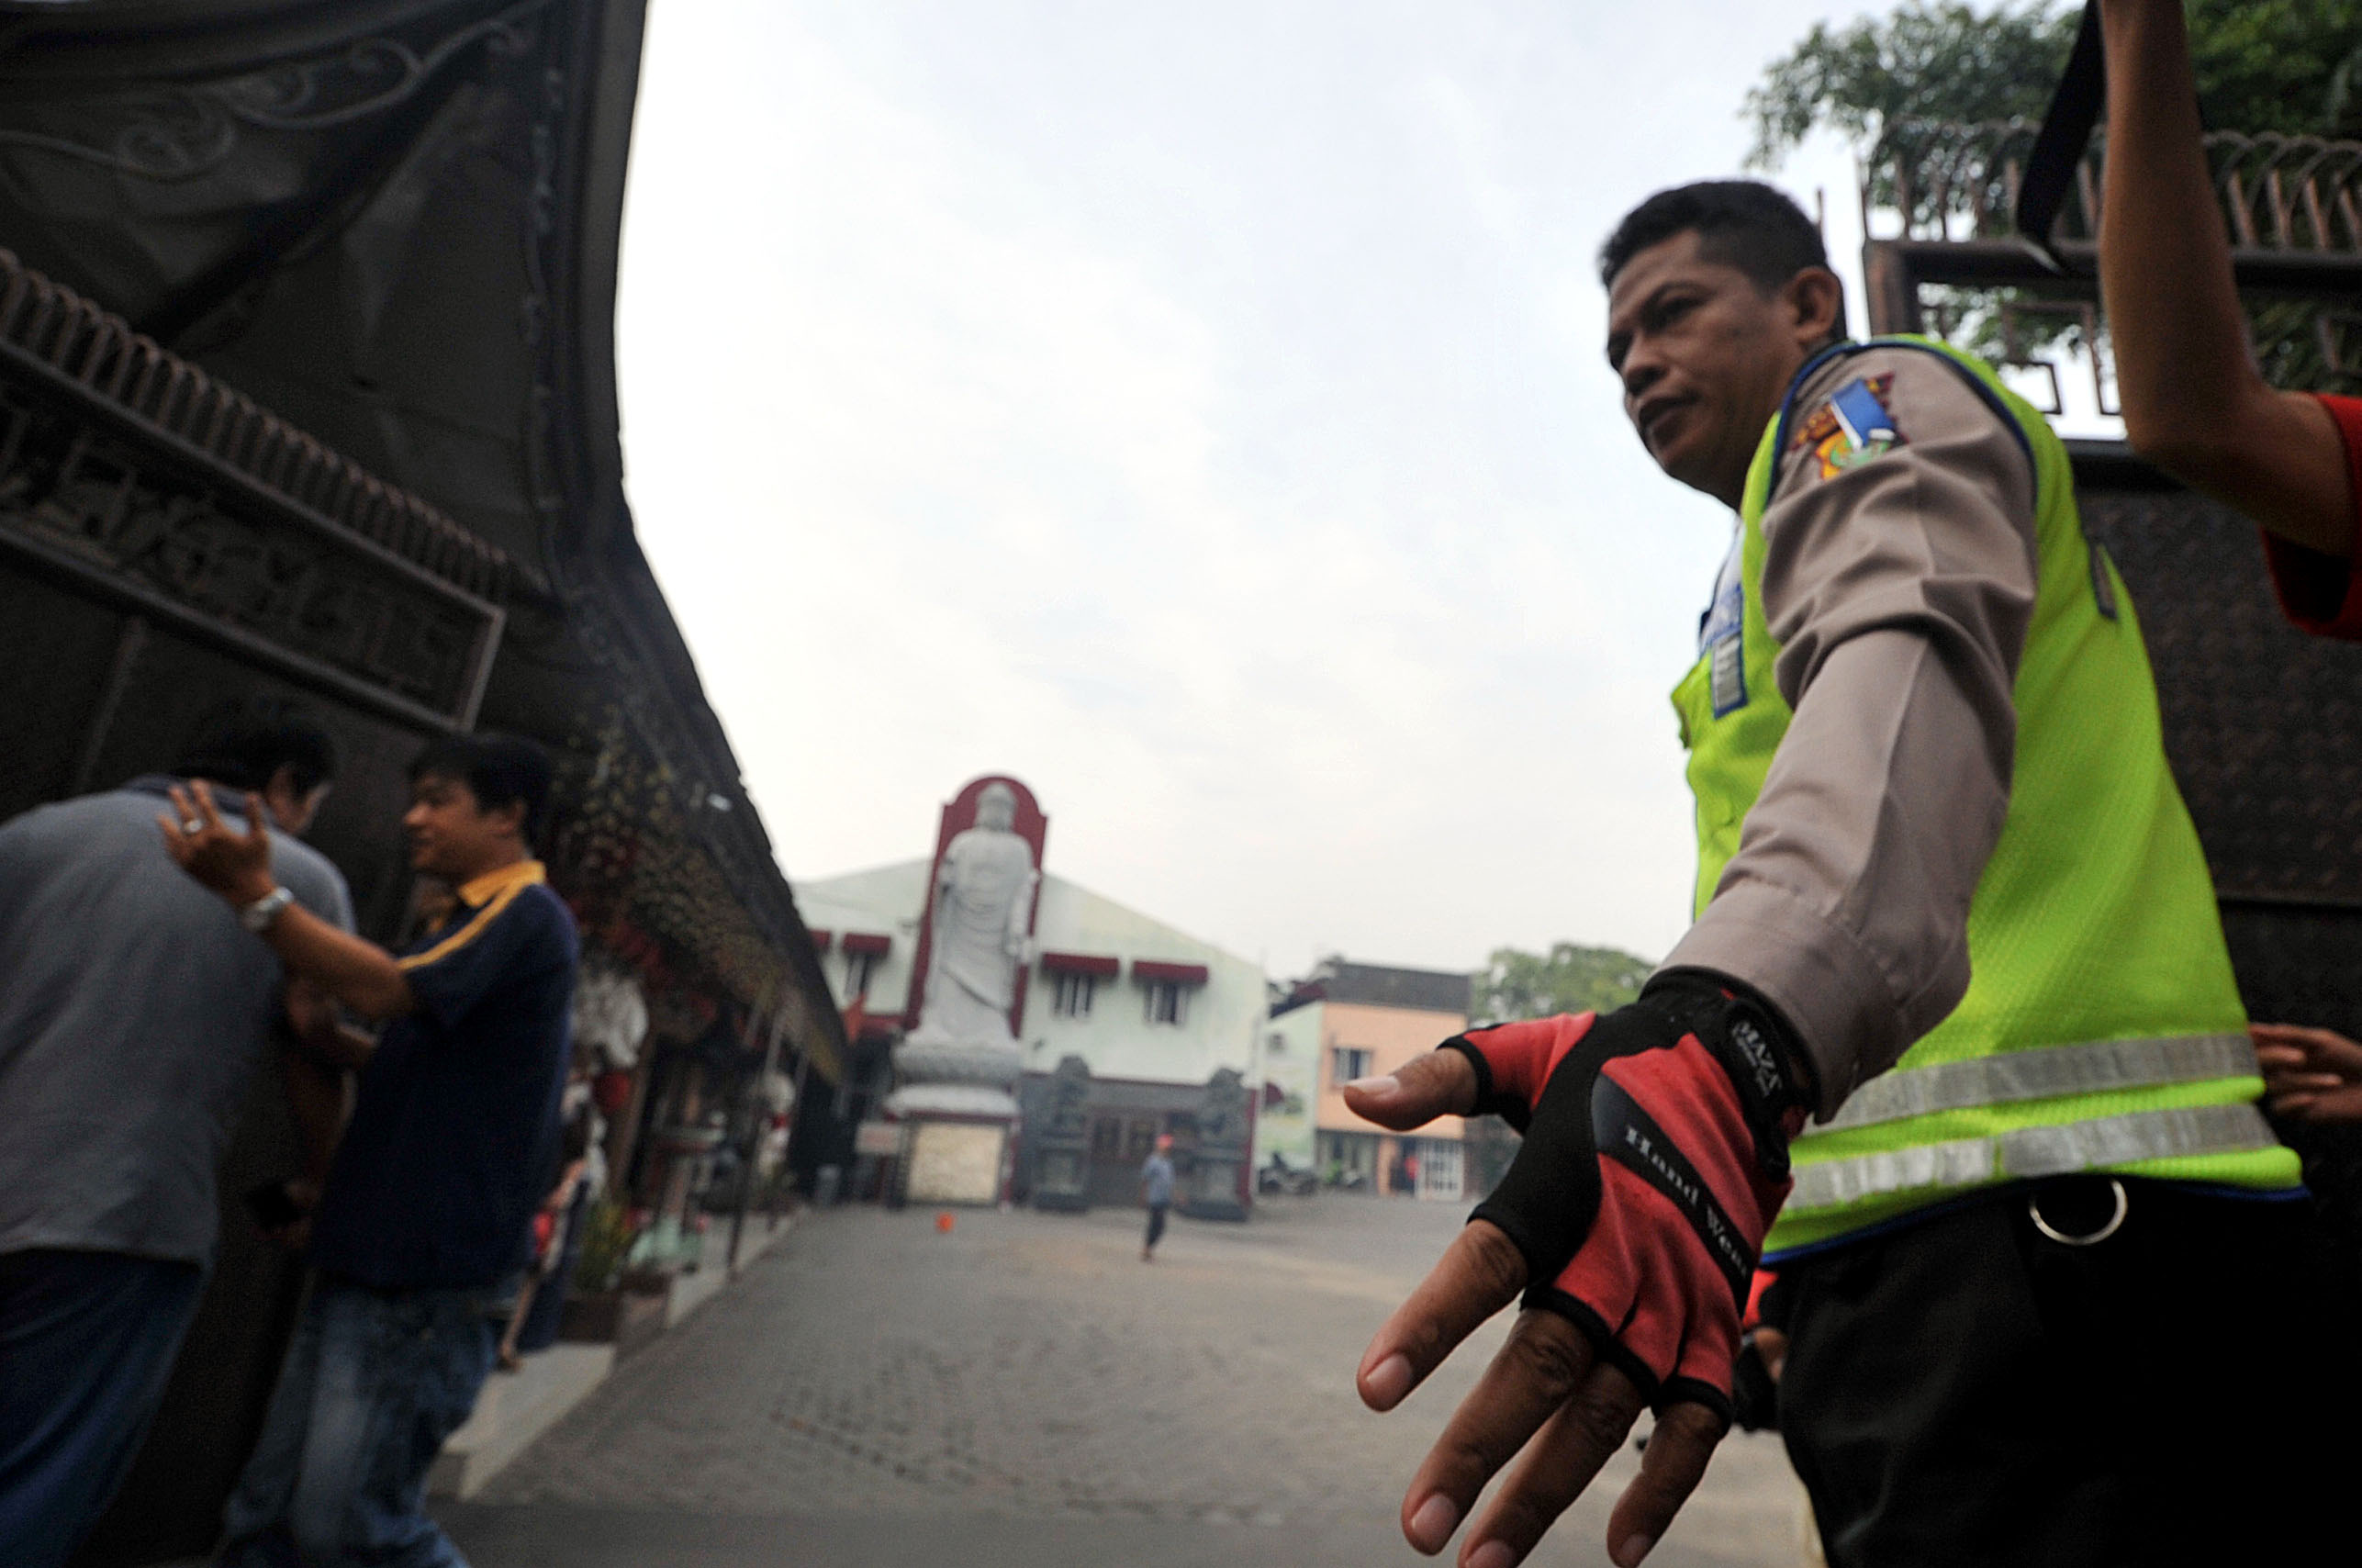 A police officer is seen outside the door of the Ekayana Buddhist temple. Photo: Xinhua